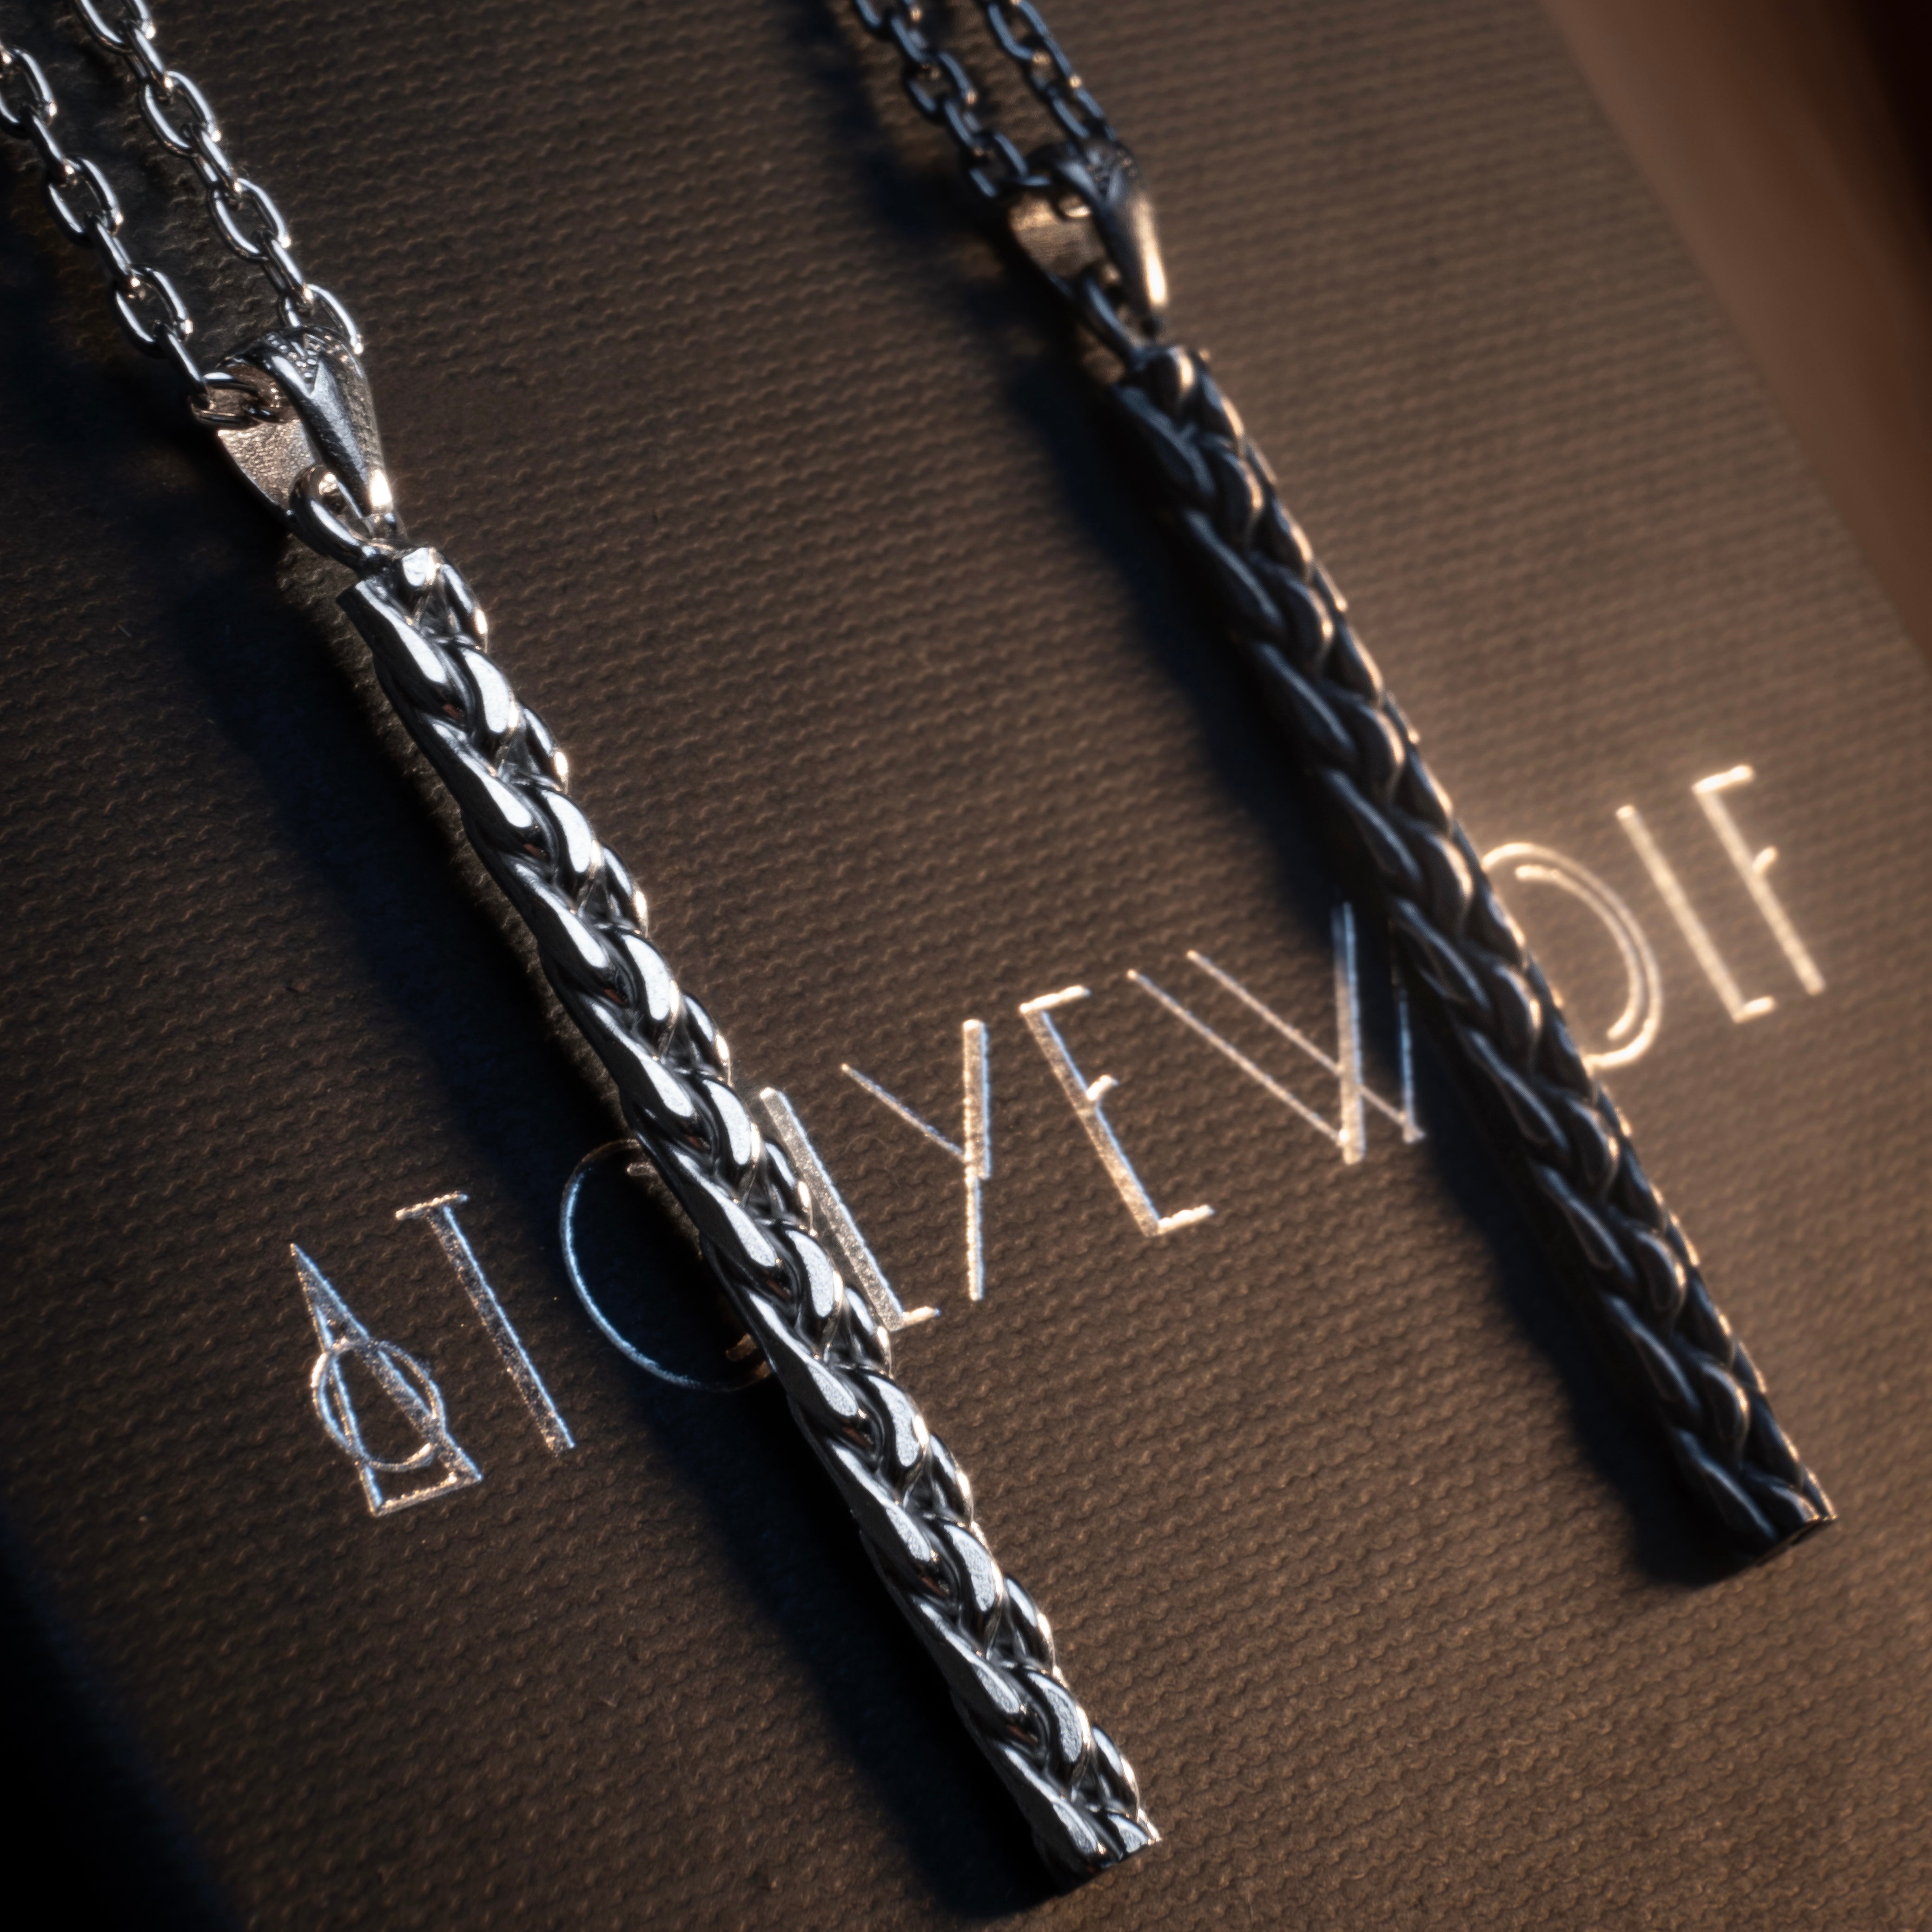 Chain Necklace in Silver